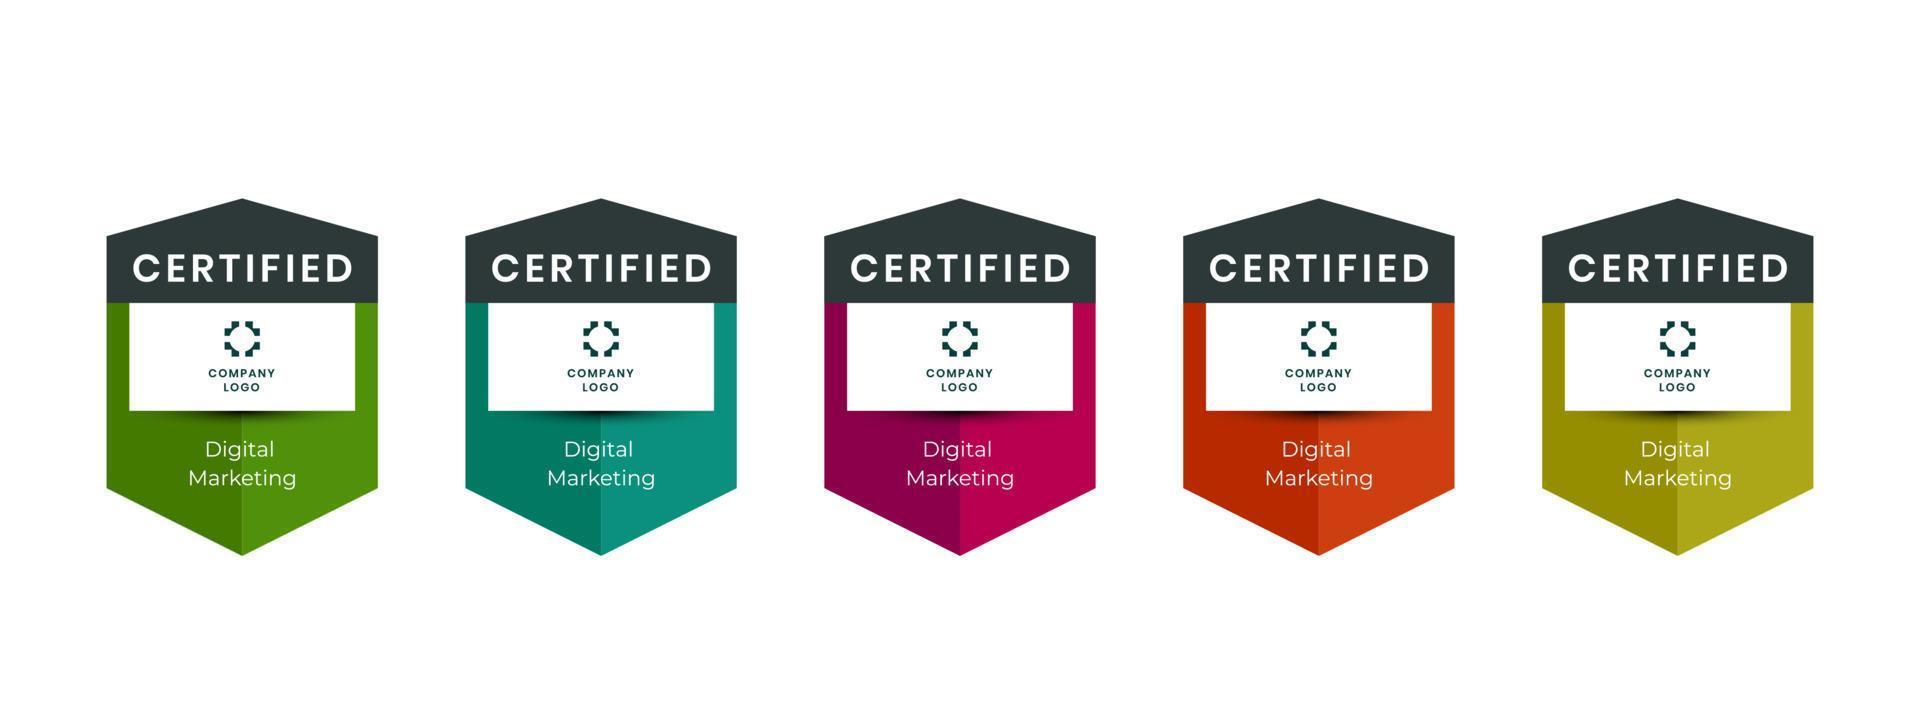 Professional certificates awarded logo badge vector. Digital certification badges awarded to technical professionals who have successfully passed a certification exam or achieved vector